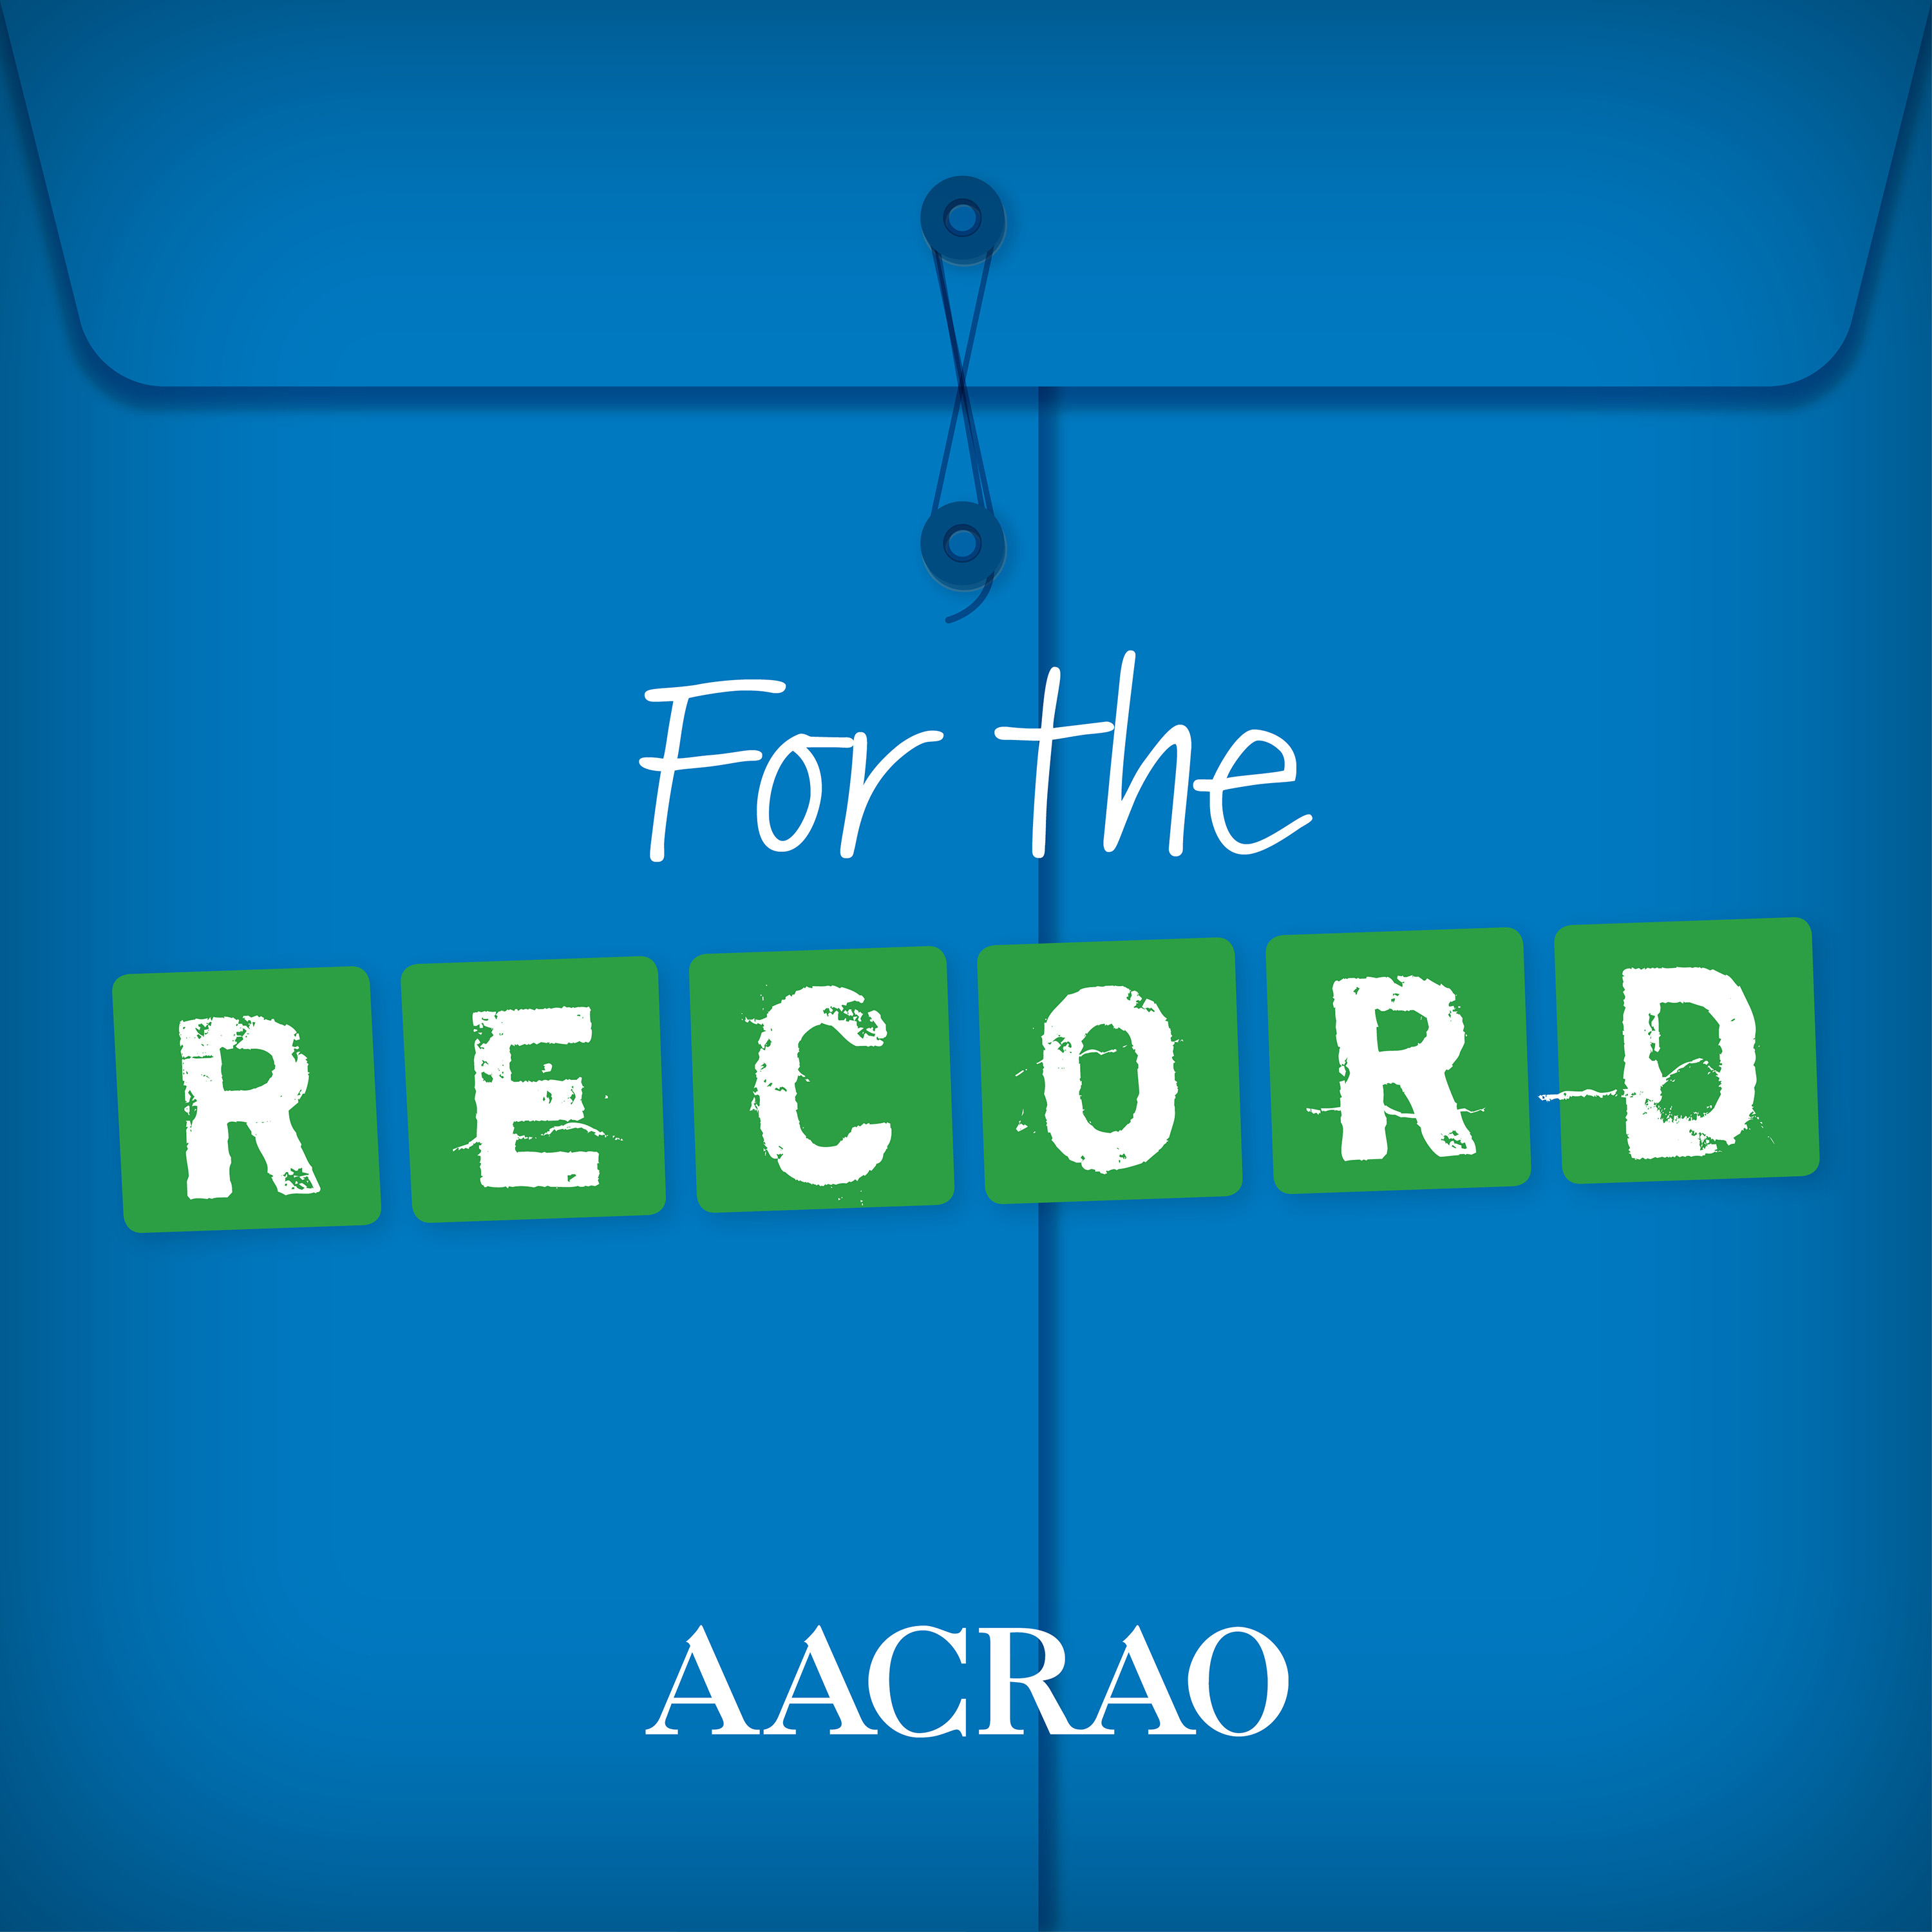 224790_AACRAO_Podcast-Record-220x220